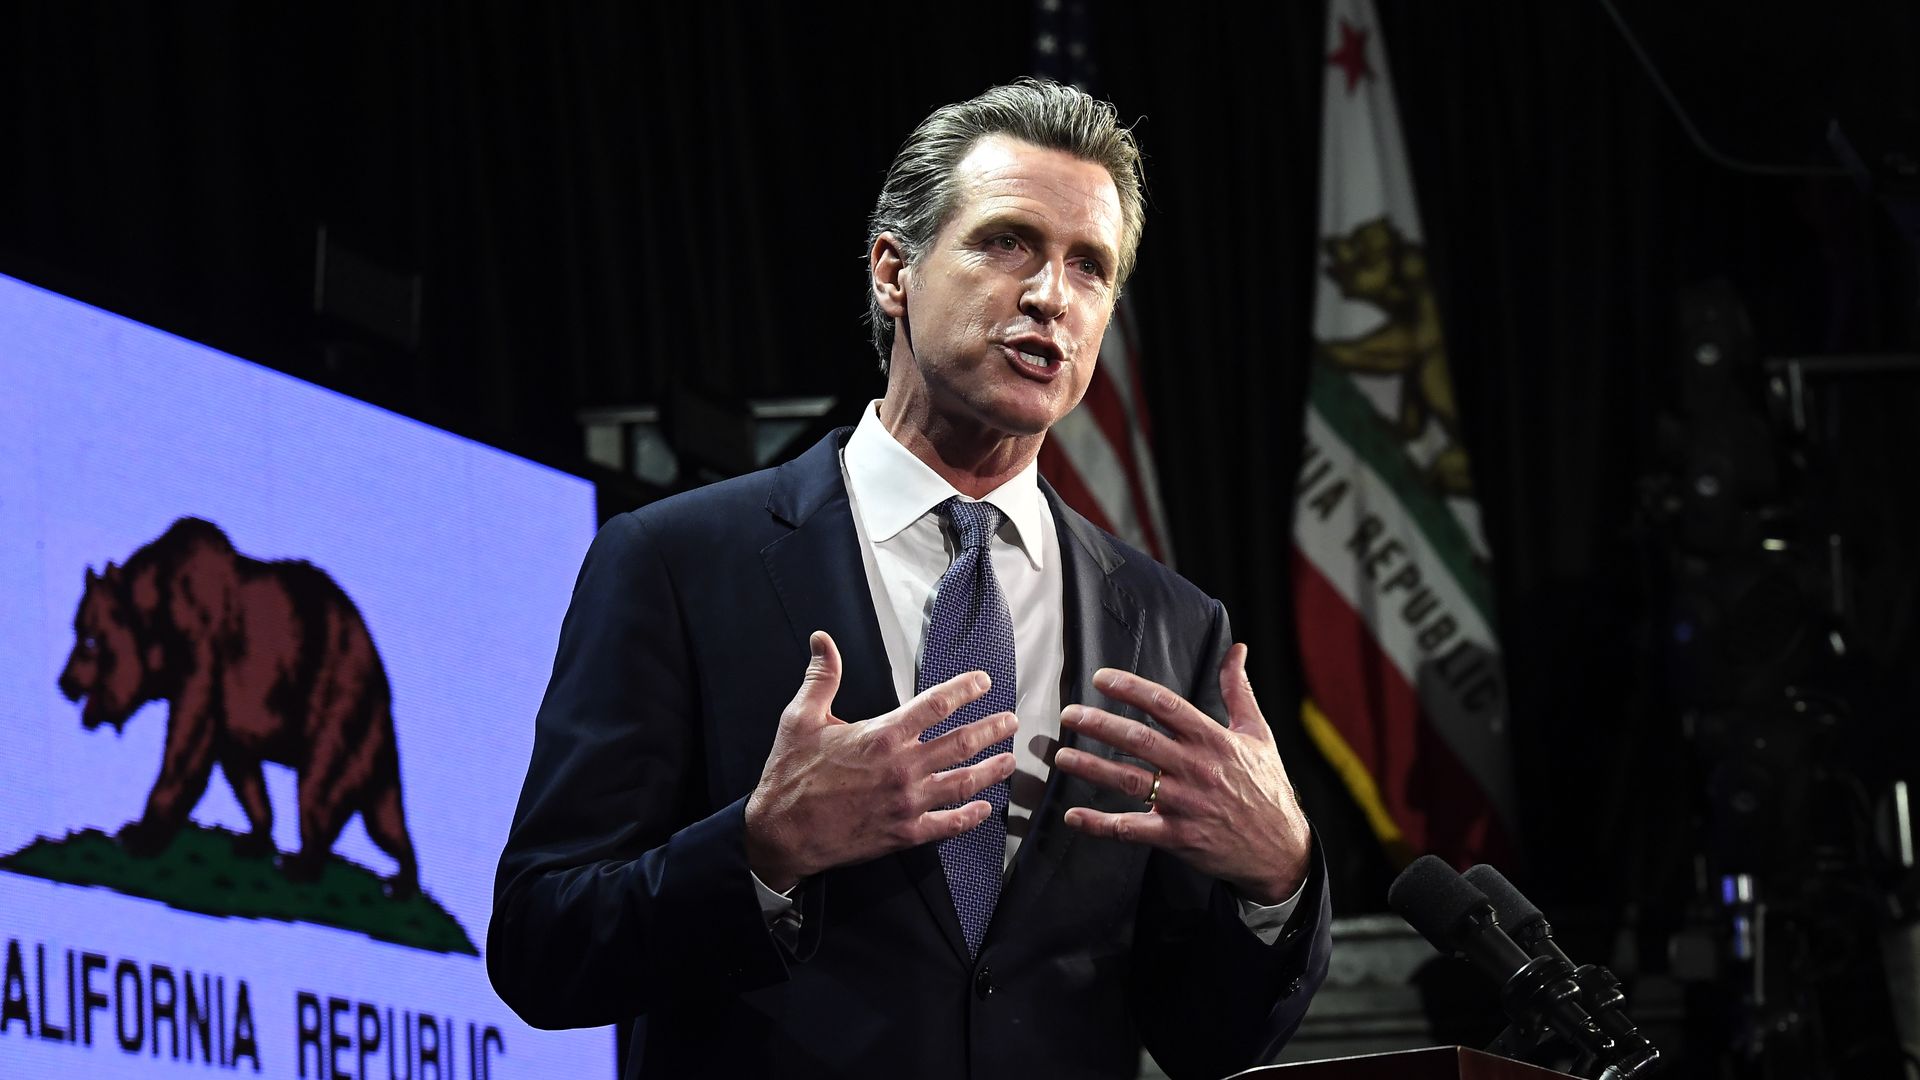 California Gov. Gavin Newsom says the death penalty is discriminatory and immoral.